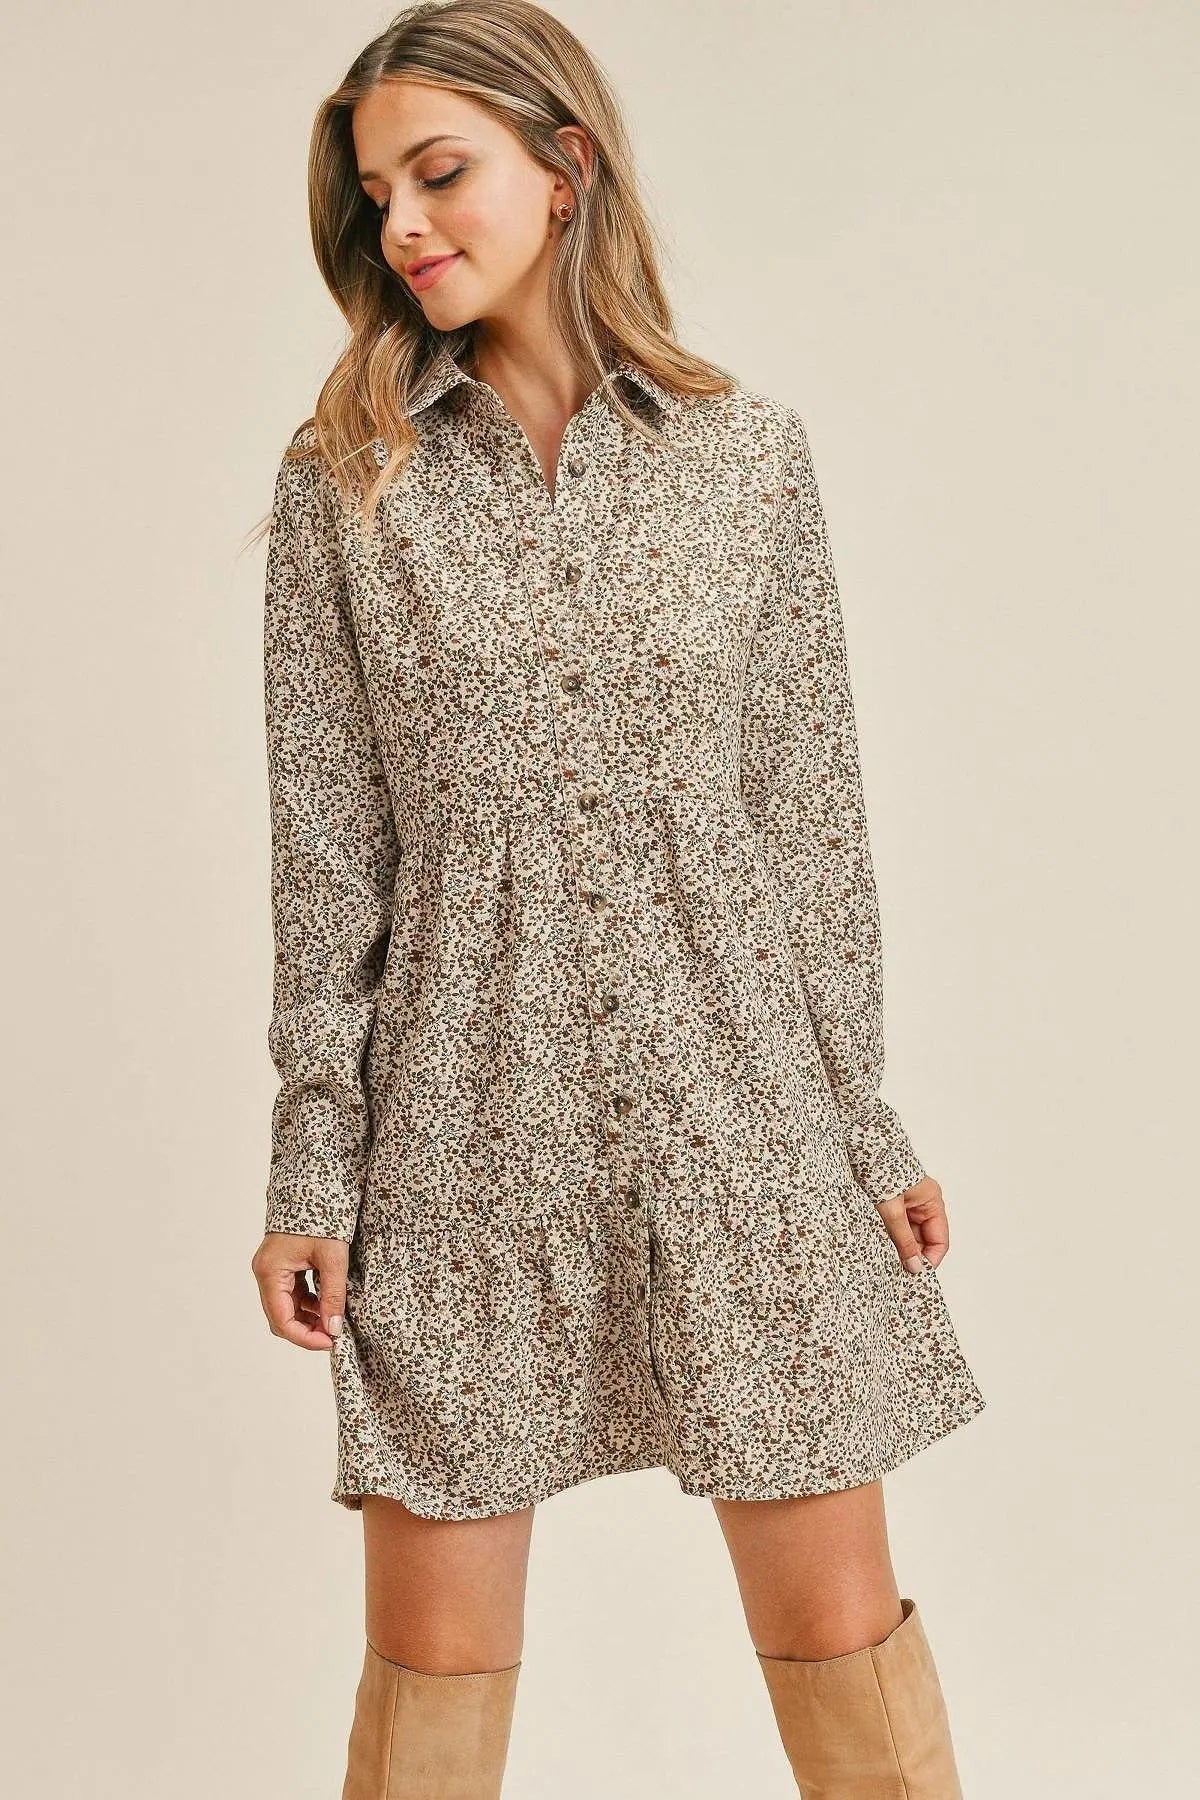 Corduroy Printed Button Down Front Collar Long Sleeve Dress Sunny EvE Fashion